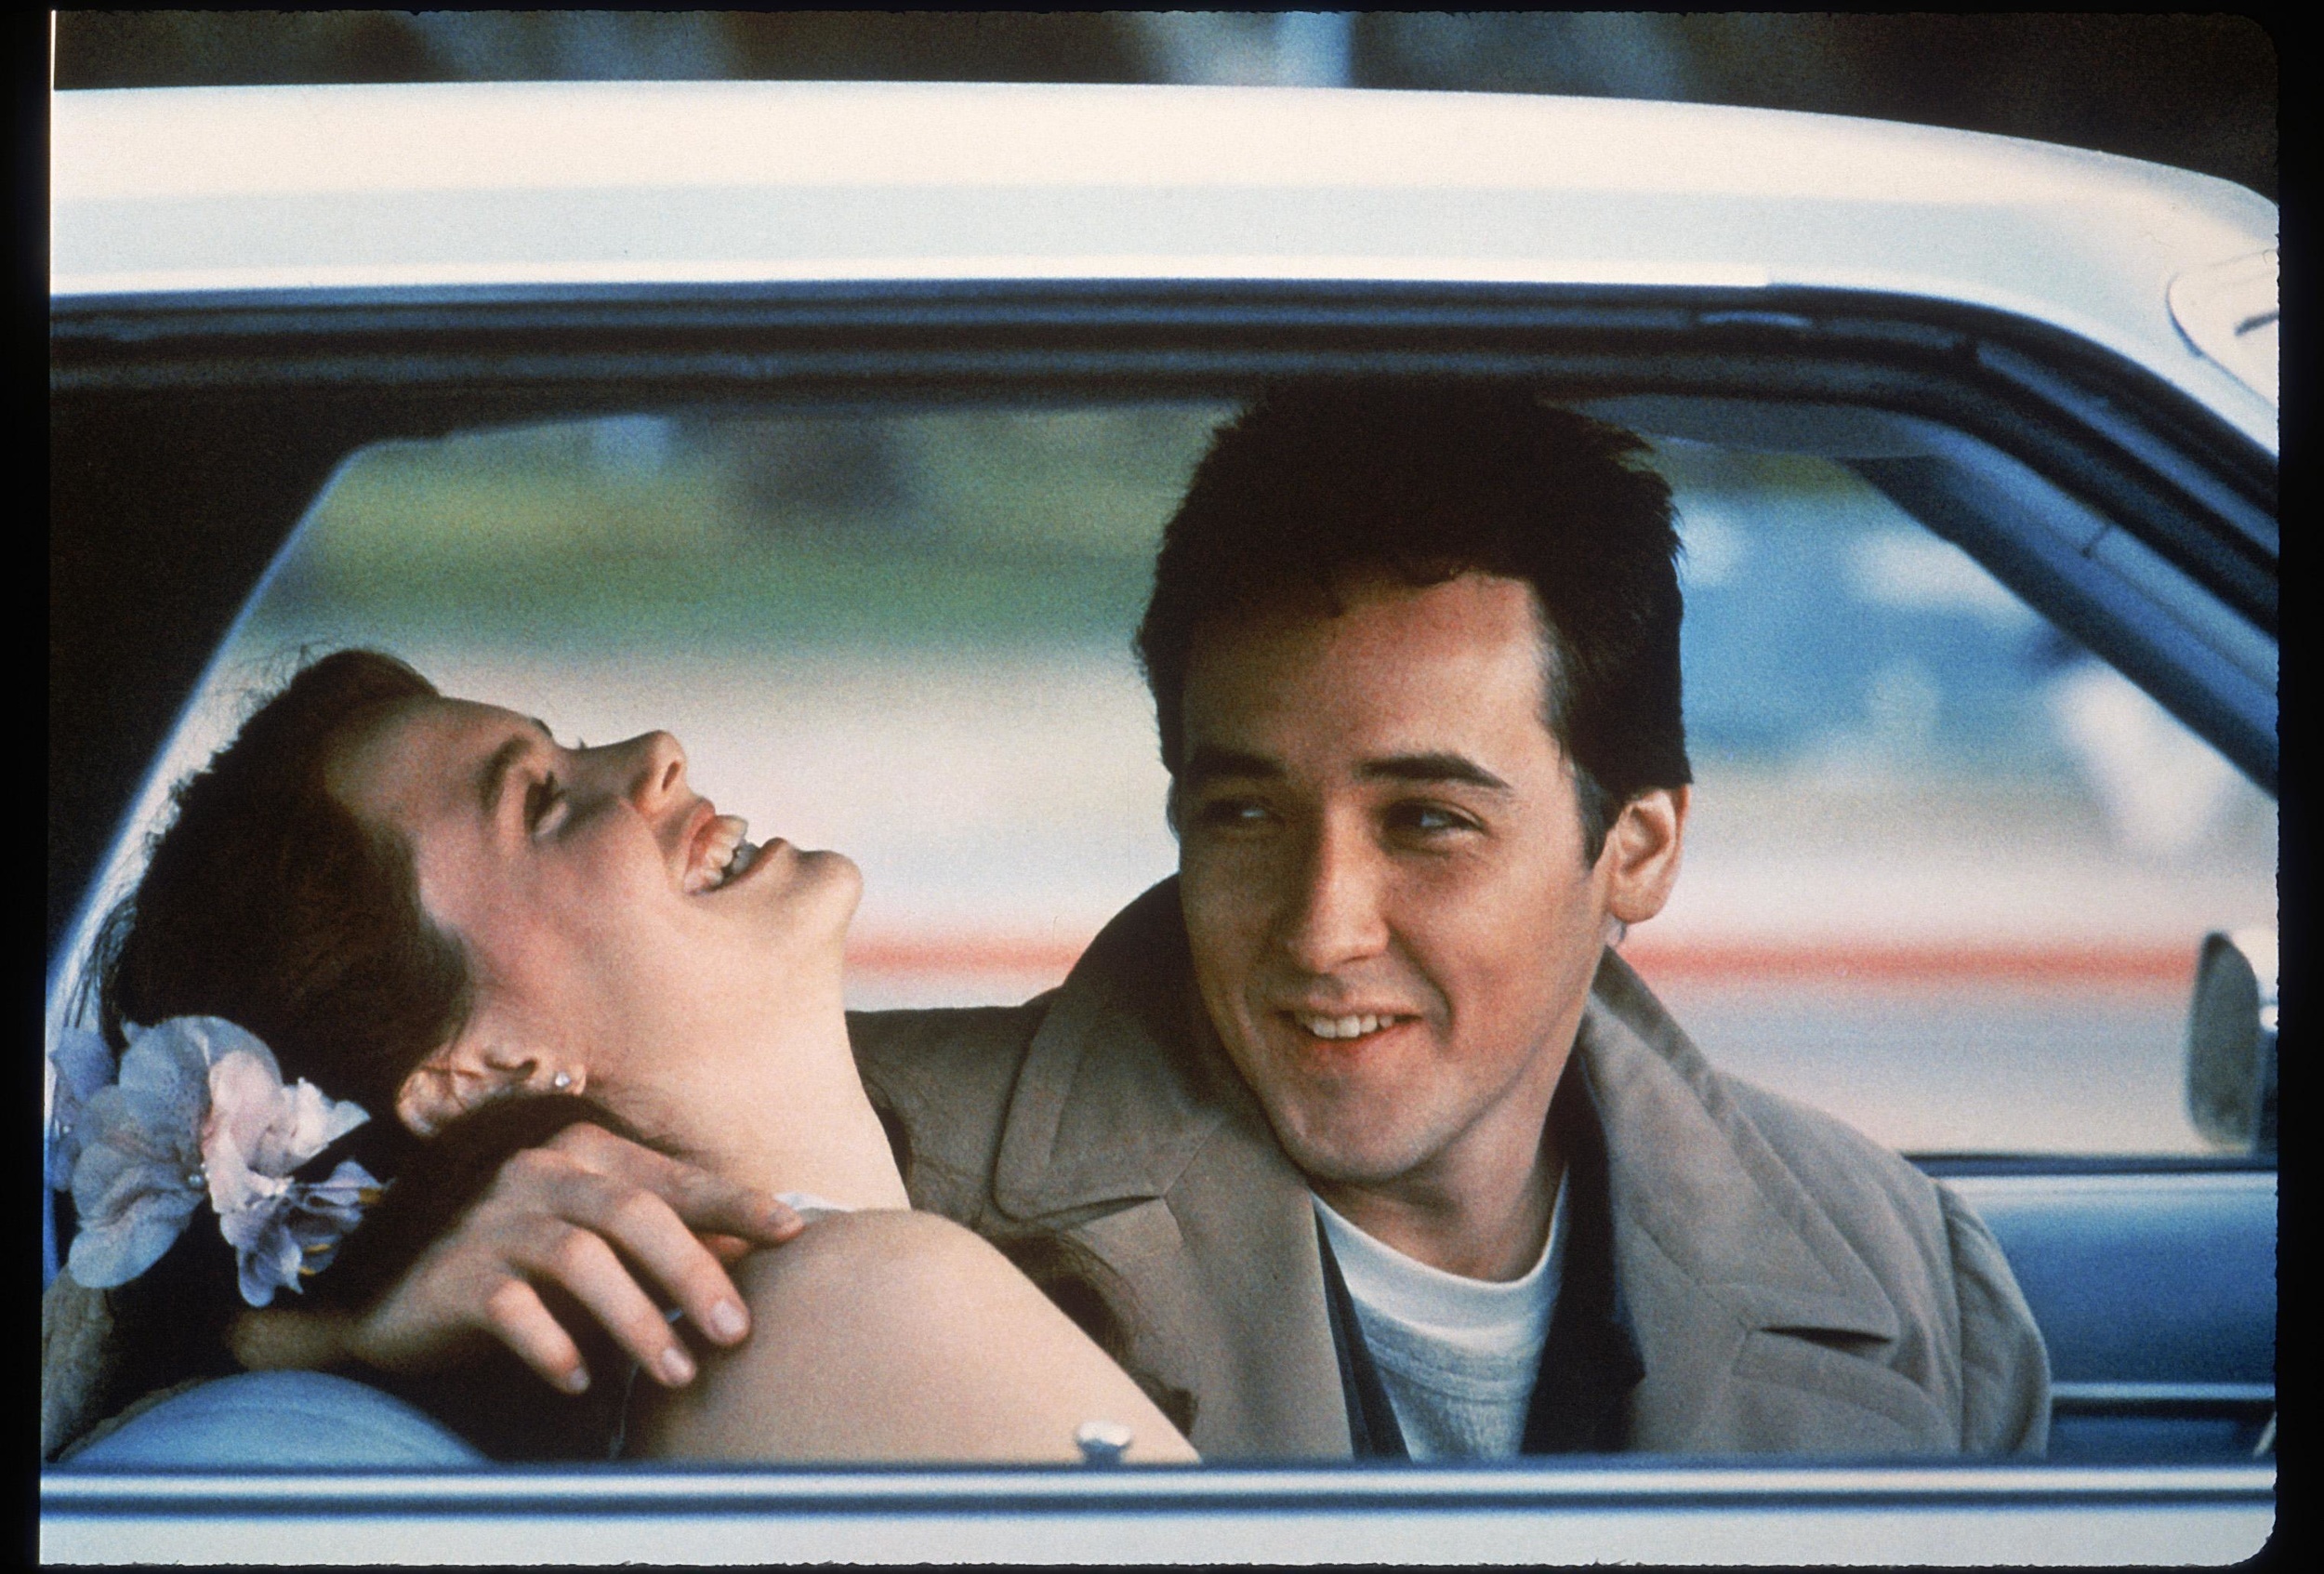 <p>Lloyd Dobler (John Cusack) is a recent high school graduate with a good heart but one who hasn't given real thought to what comes next. He knows he wants to spend time with the intelligent and beautiful Diane Corte (Ione Skye). Lloyd has been considered a great non-sports underdog in film history (though he dabbles in kickboxing). His <a href="https://www.youtube.com/watch?v=S5Y8tFQ01OY&t=2s">boom-box-over-head scene</a> is one of the most memorable of all time.</p>